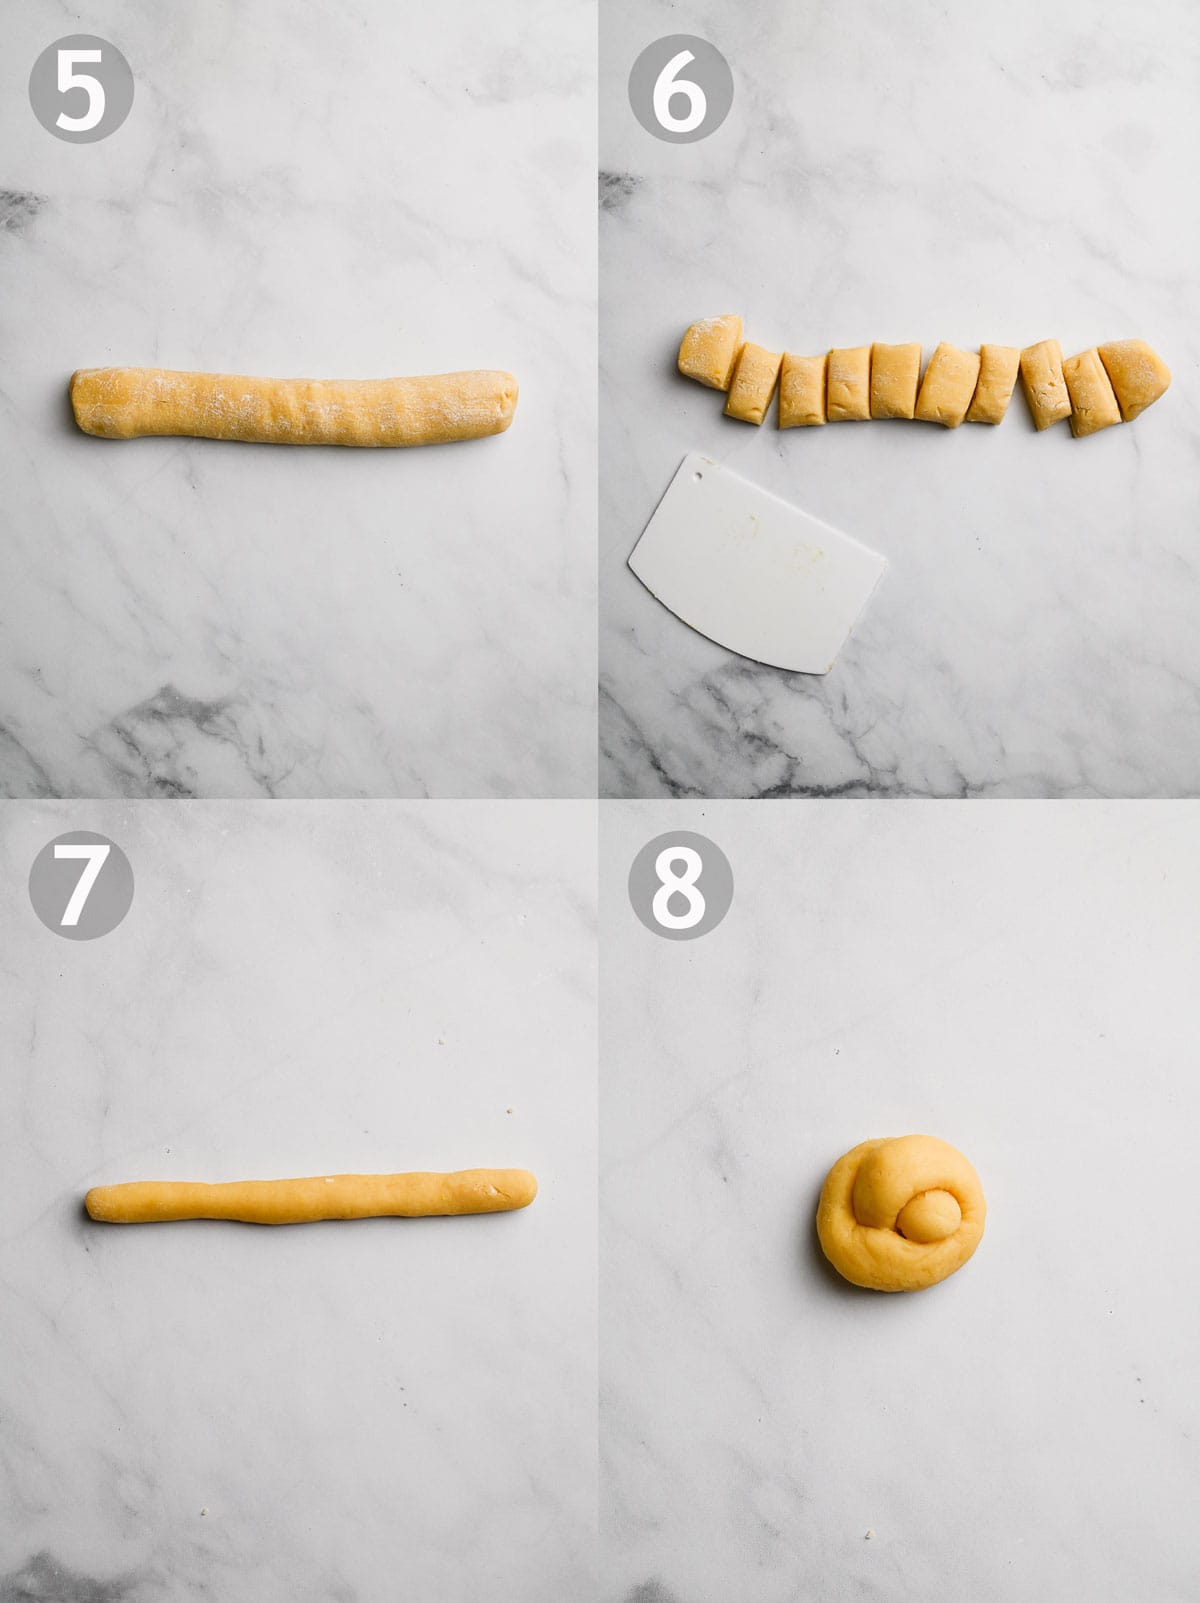 Steps to roll and shape cookies into a knot.